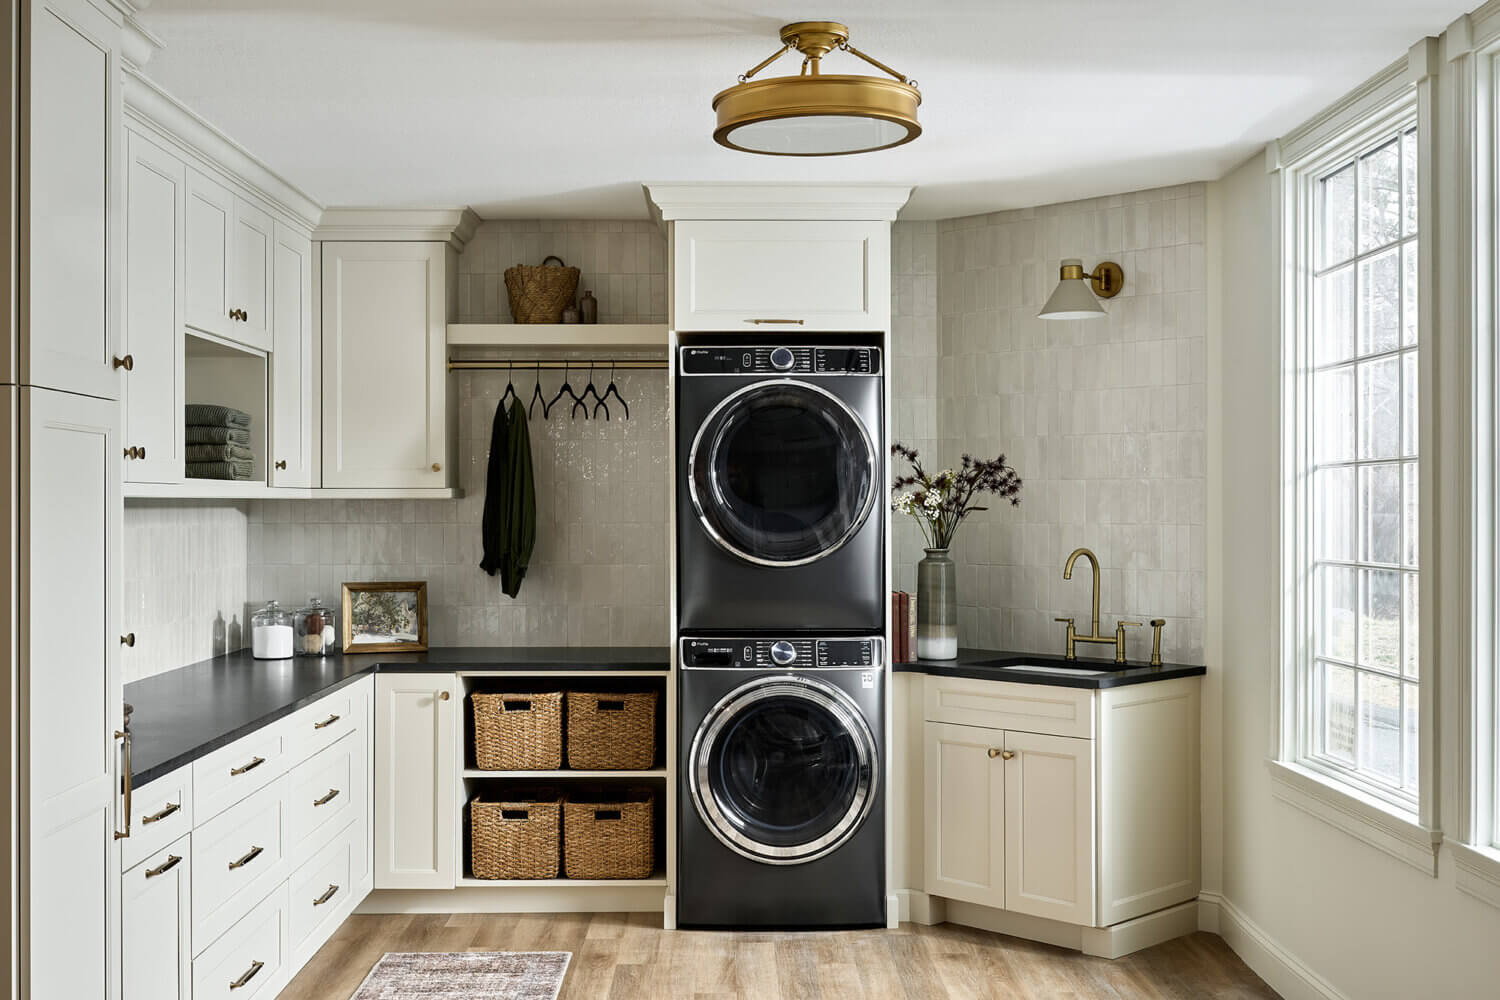 A beautiful laundry room with painted cabinets from Dura Supreme.